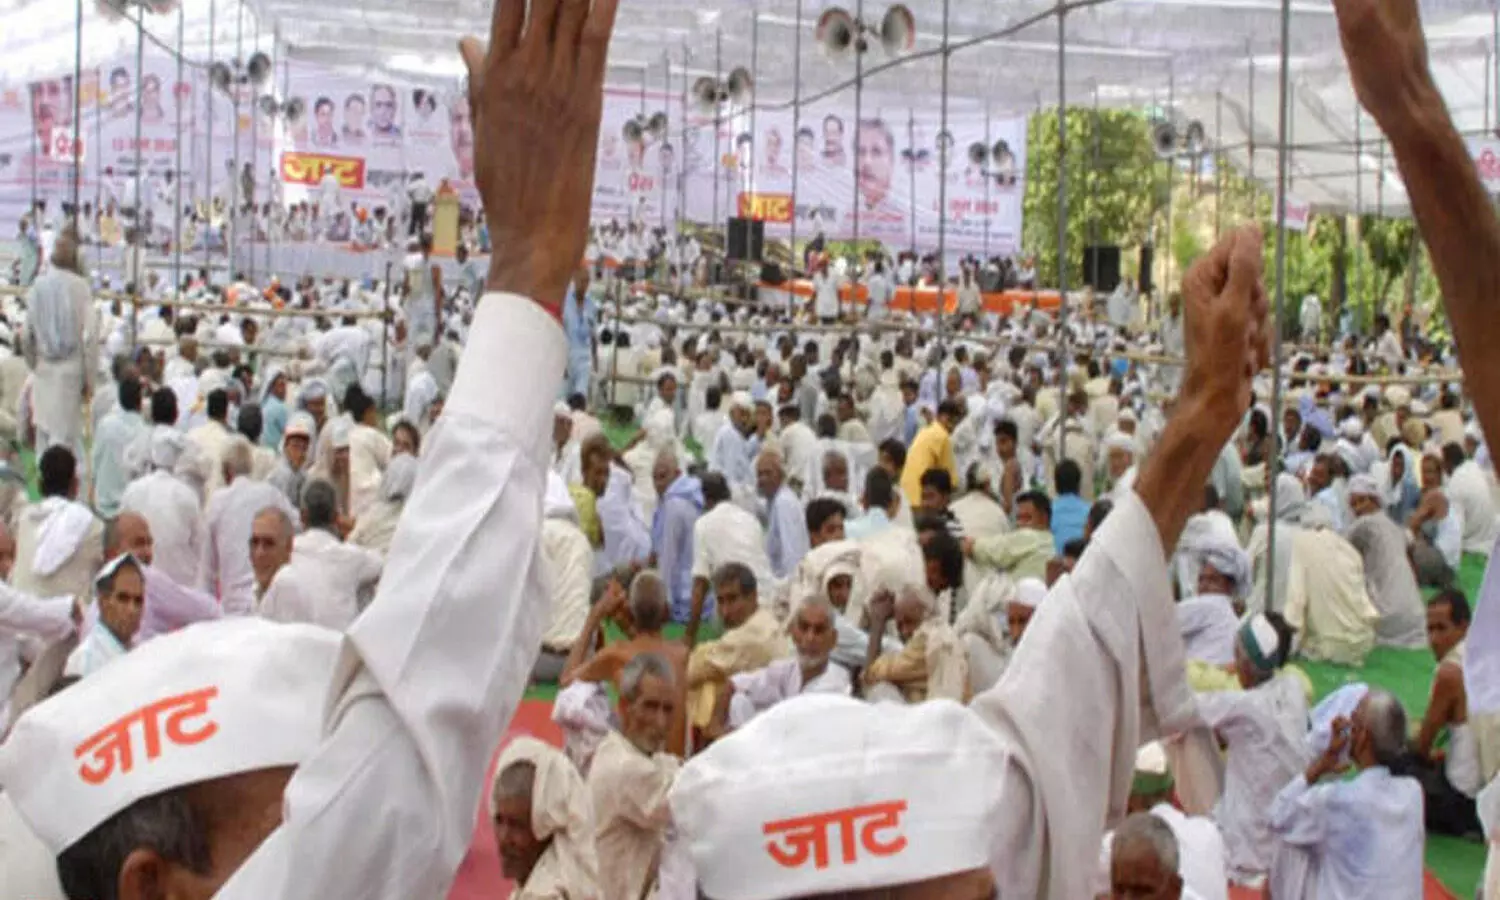 Jat Land - The prominent factor in UP politics